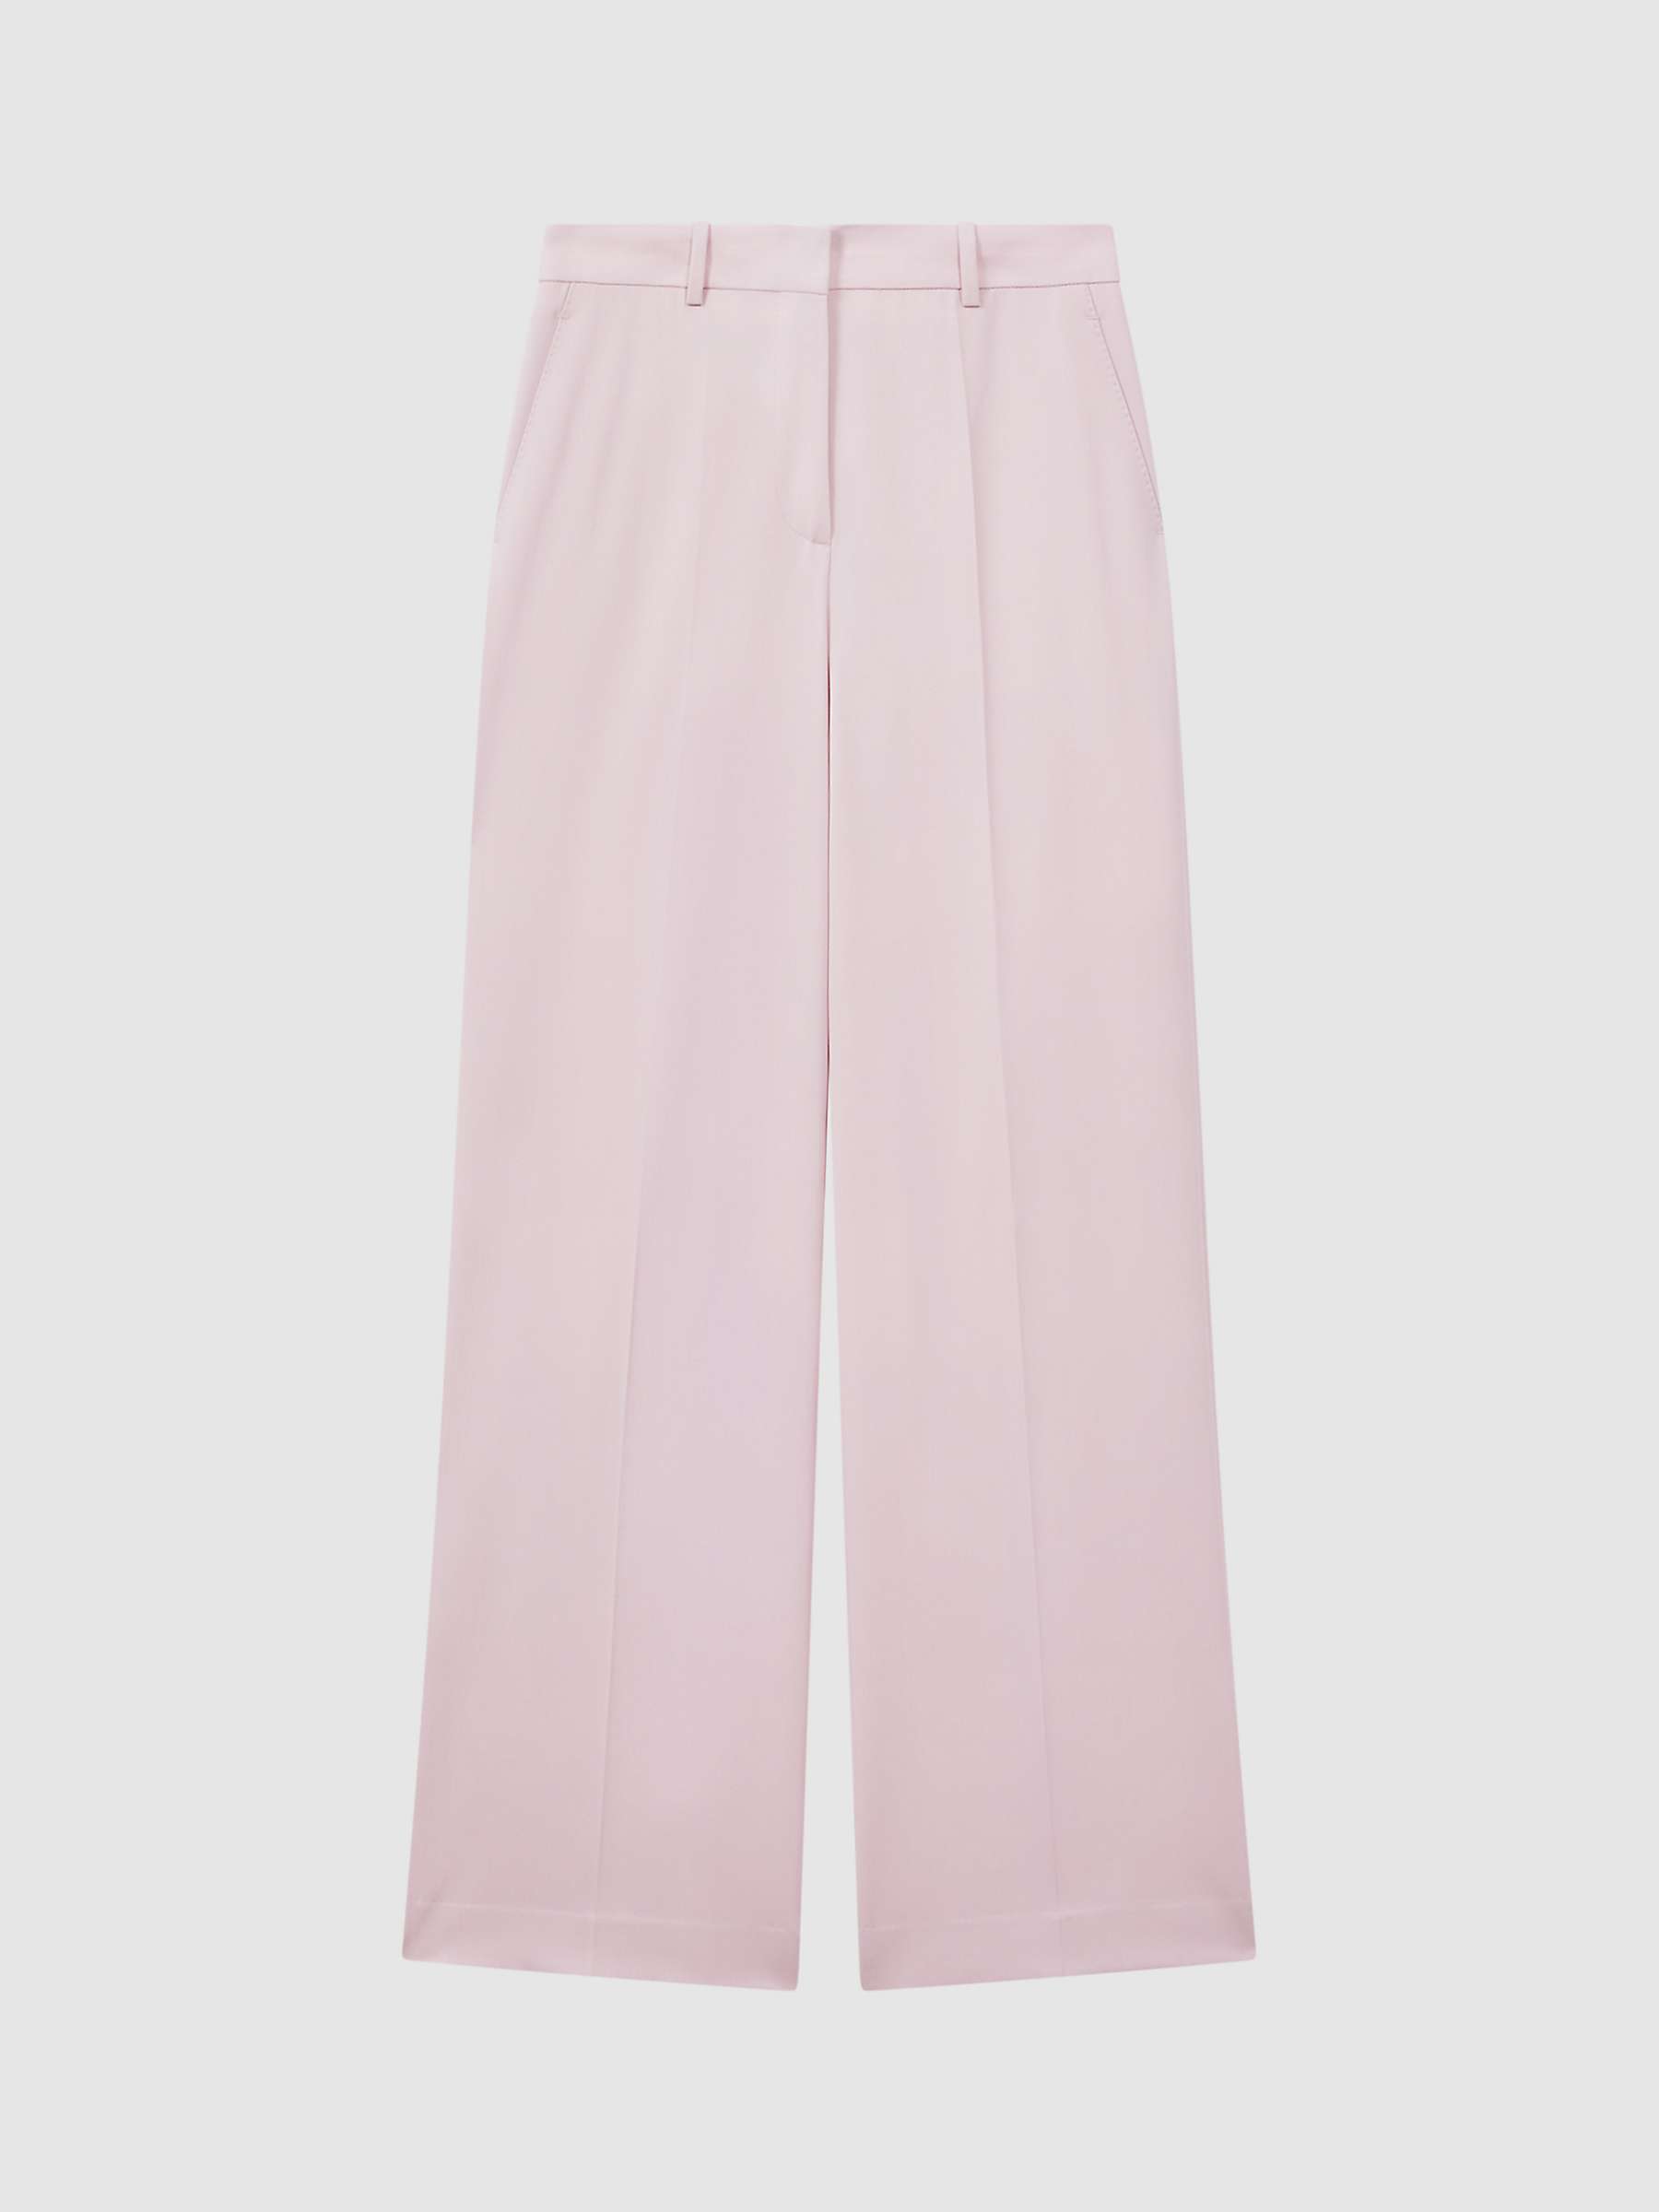 Buy Reiss Evelyn Wool Blend Wide Leg Tailored Trousers, Pink Online at johnlewis.com